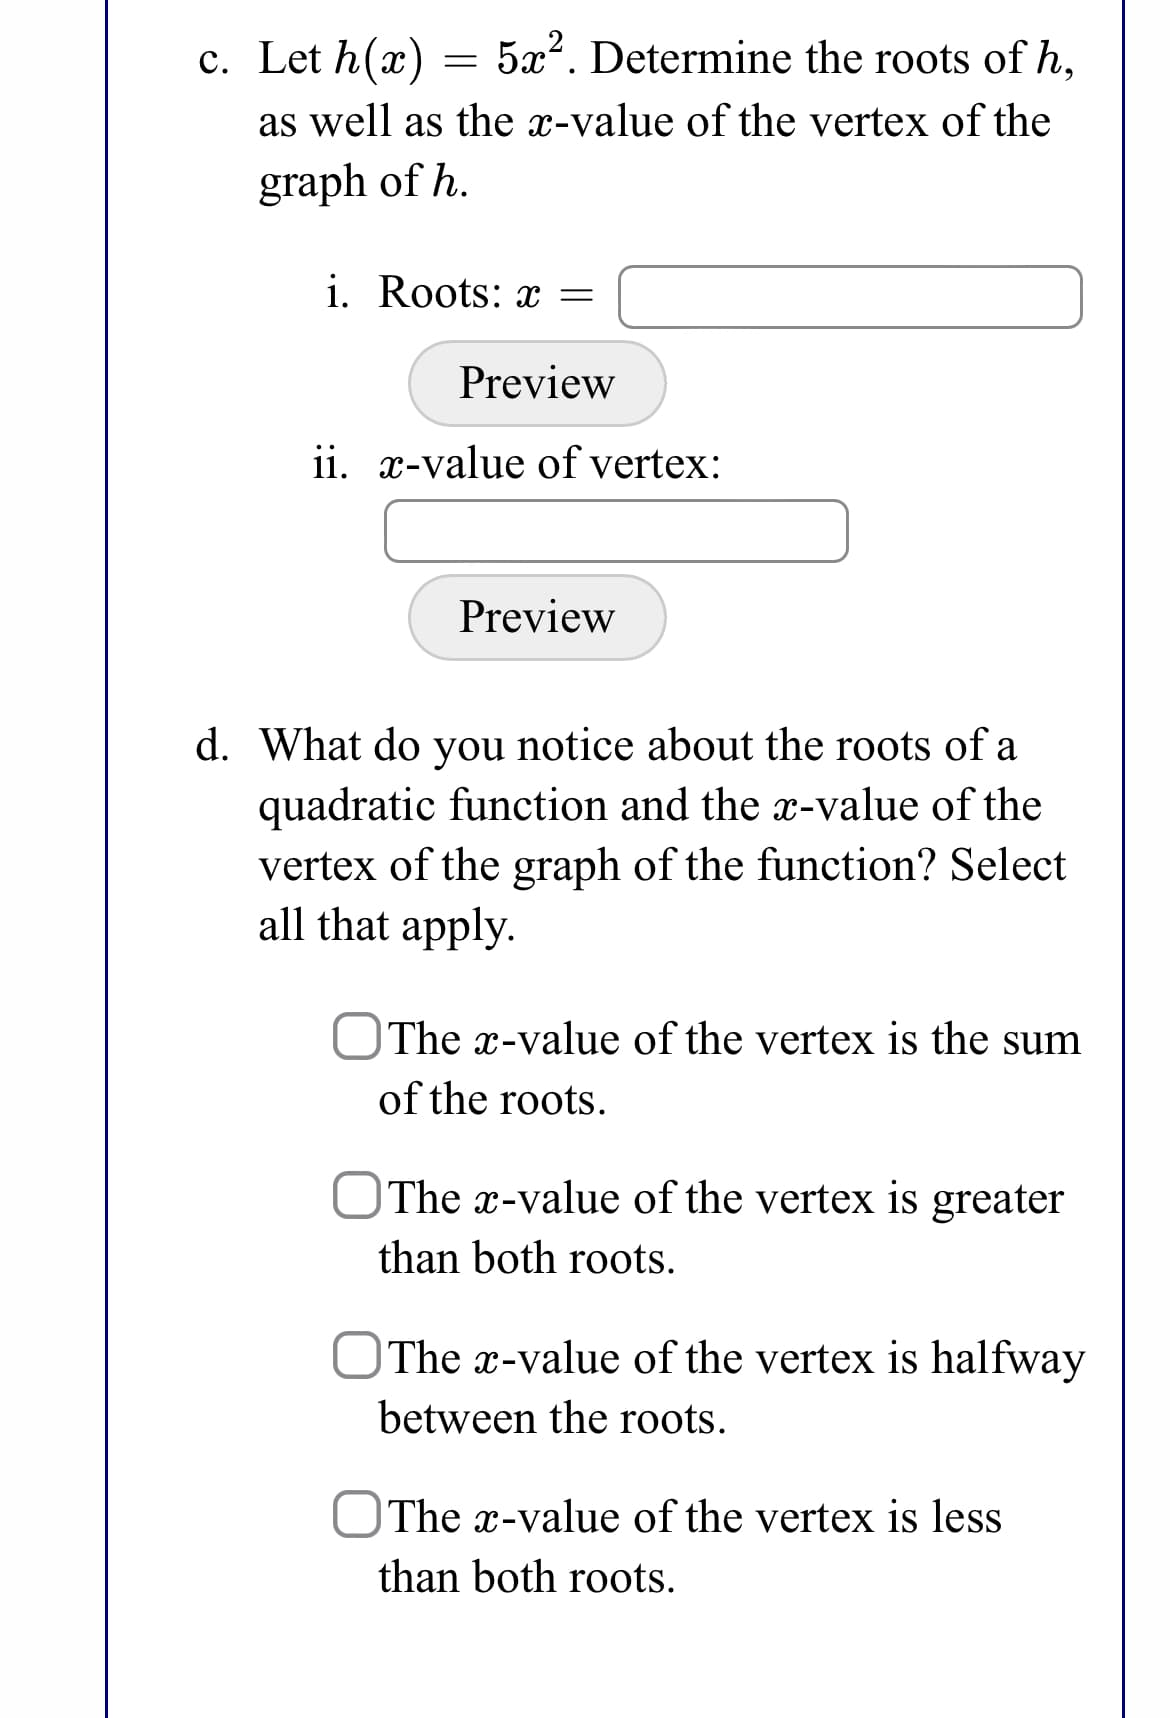 c. Let h(x)
5x2. Determine the roots of h,
as well as the x-value of the vertex of the
graph of h.
i. Roots: x =
Preview
ii. x-value of vertex:
Preview
d. What do you notice about the roots of a
quadratic function and the x-value of the
vertex of the graph of the function? Select
all that apply.
The x-value of the vertex is the sum
of the roots.
OThe x-value of the vertex is greater
than both roots.
OThe x-value of the vertex is halfway
between the roots.
|The x-value of the vertex is less
than both roots.
